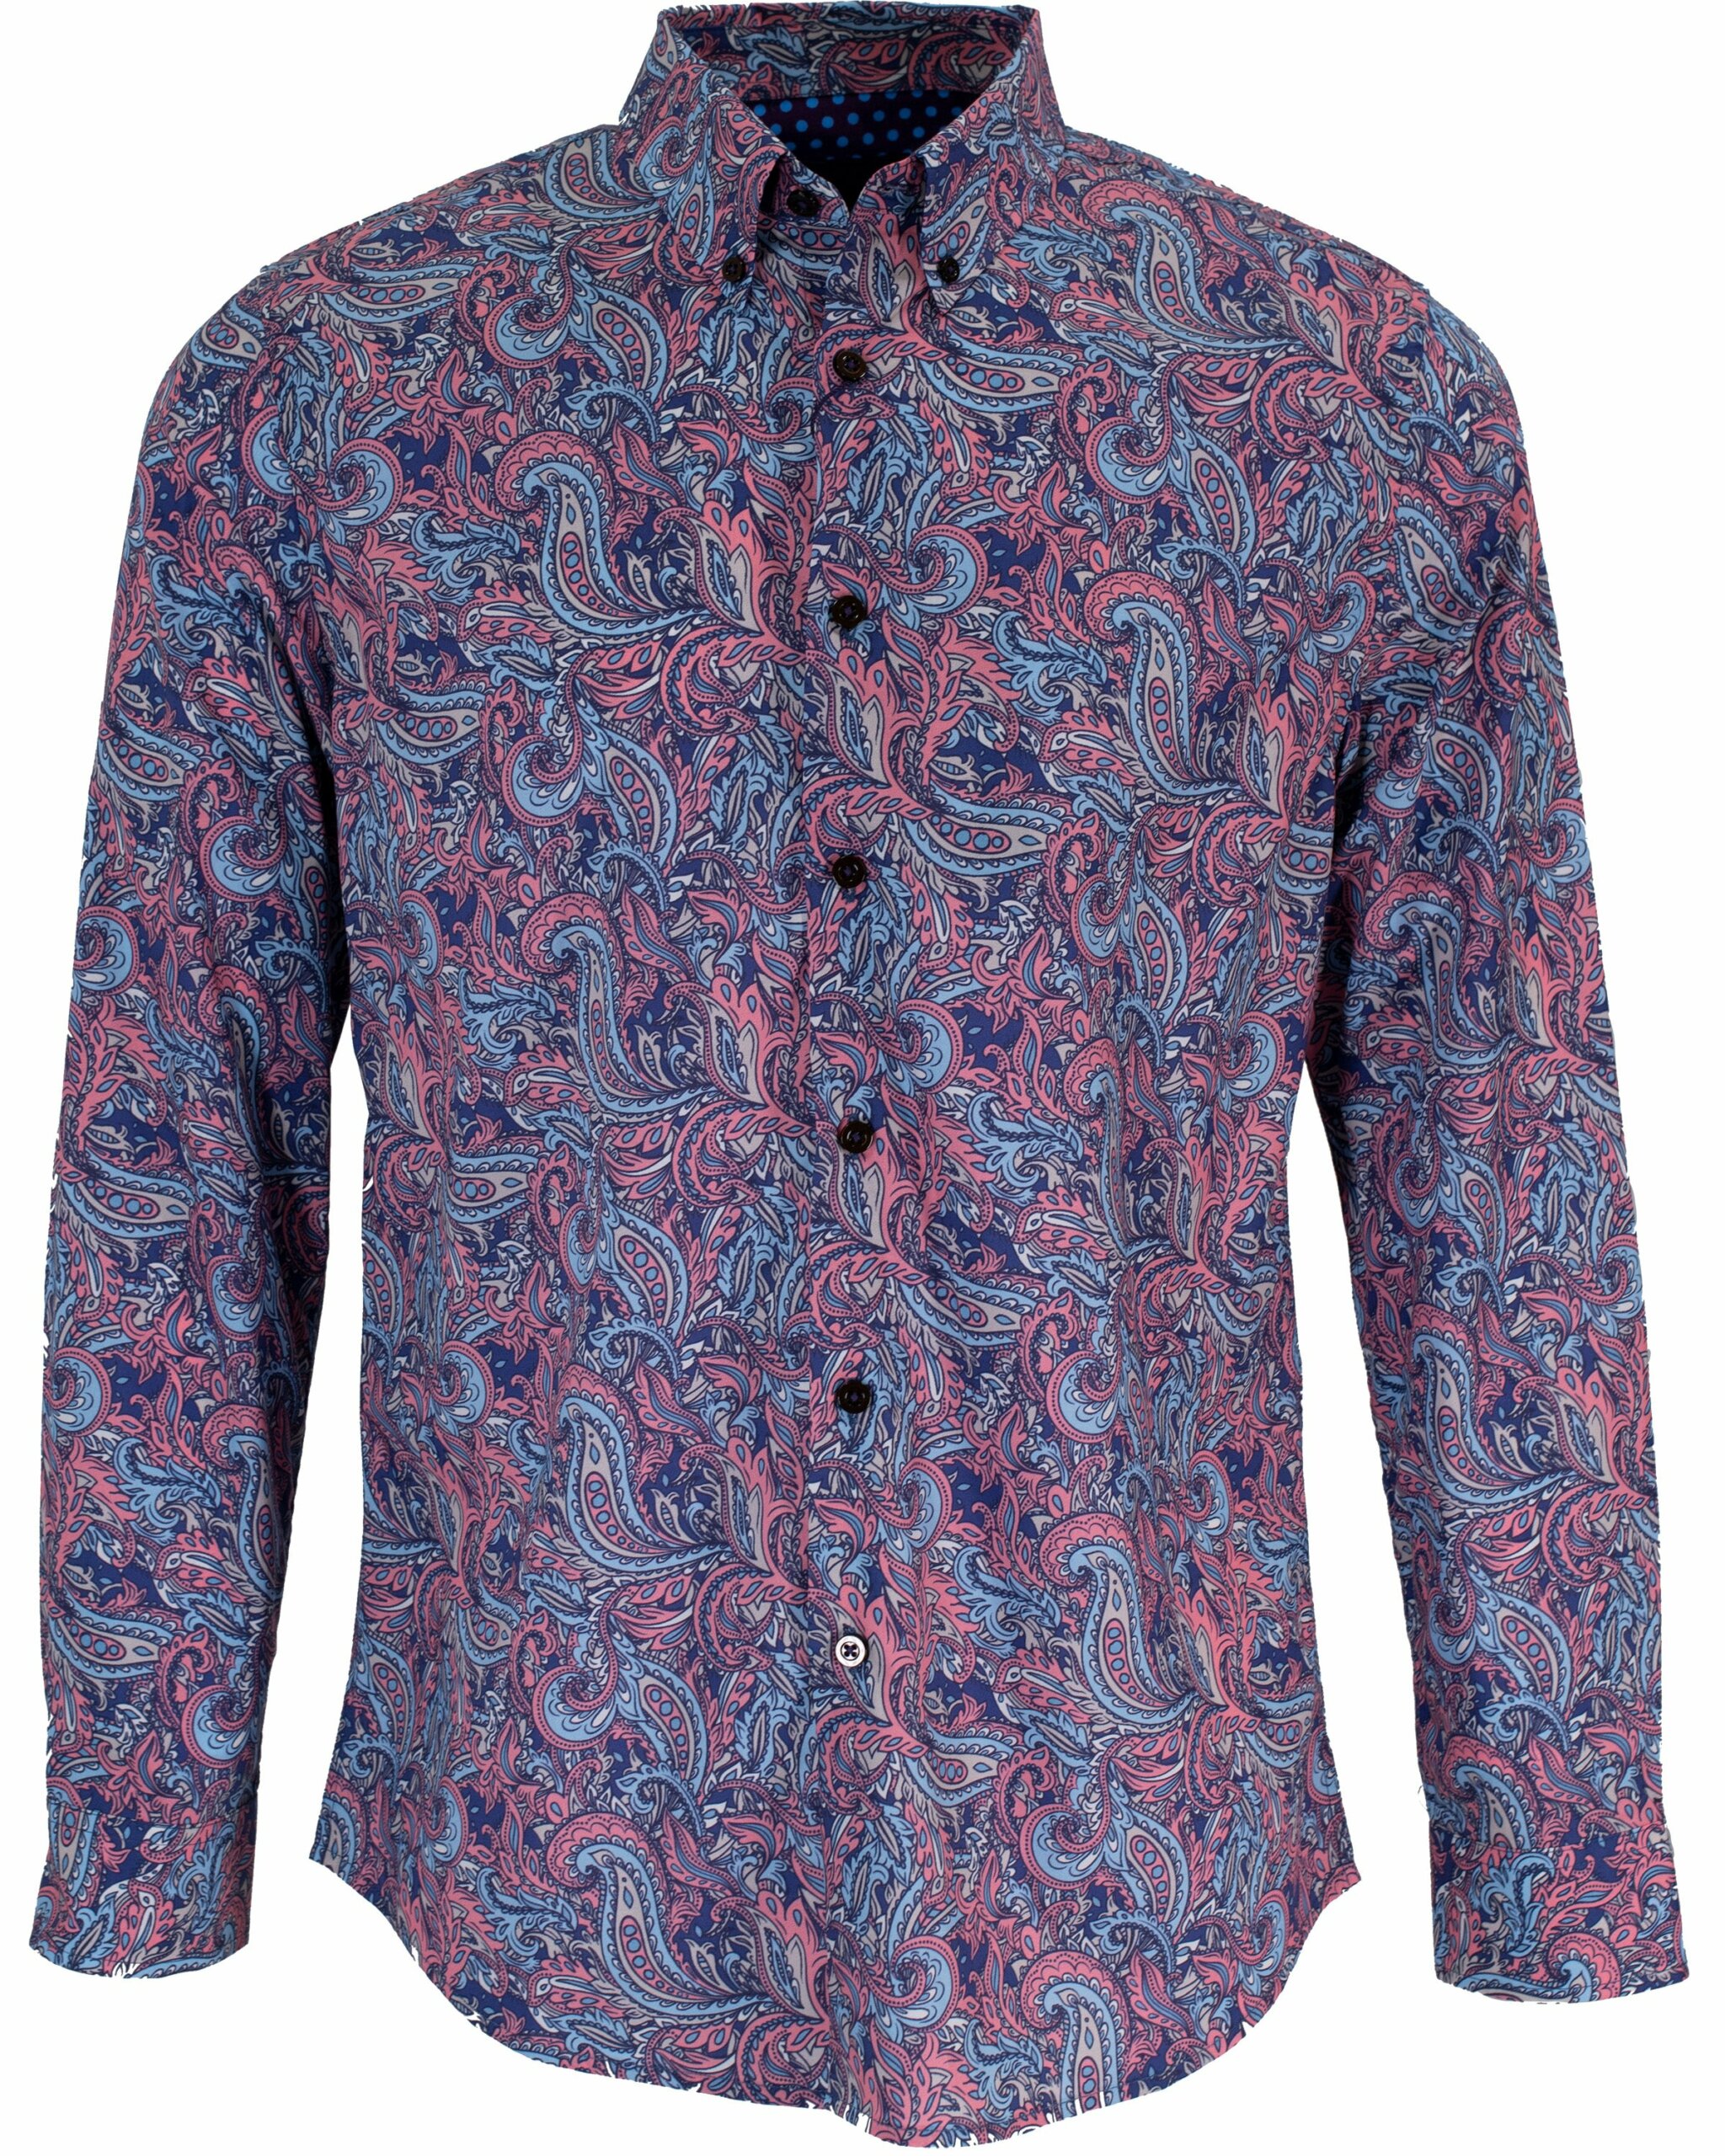 Men's Blue / White / Pink Mitchell Paisley Goal Shirt In Strawberry Small Lords of Harlech